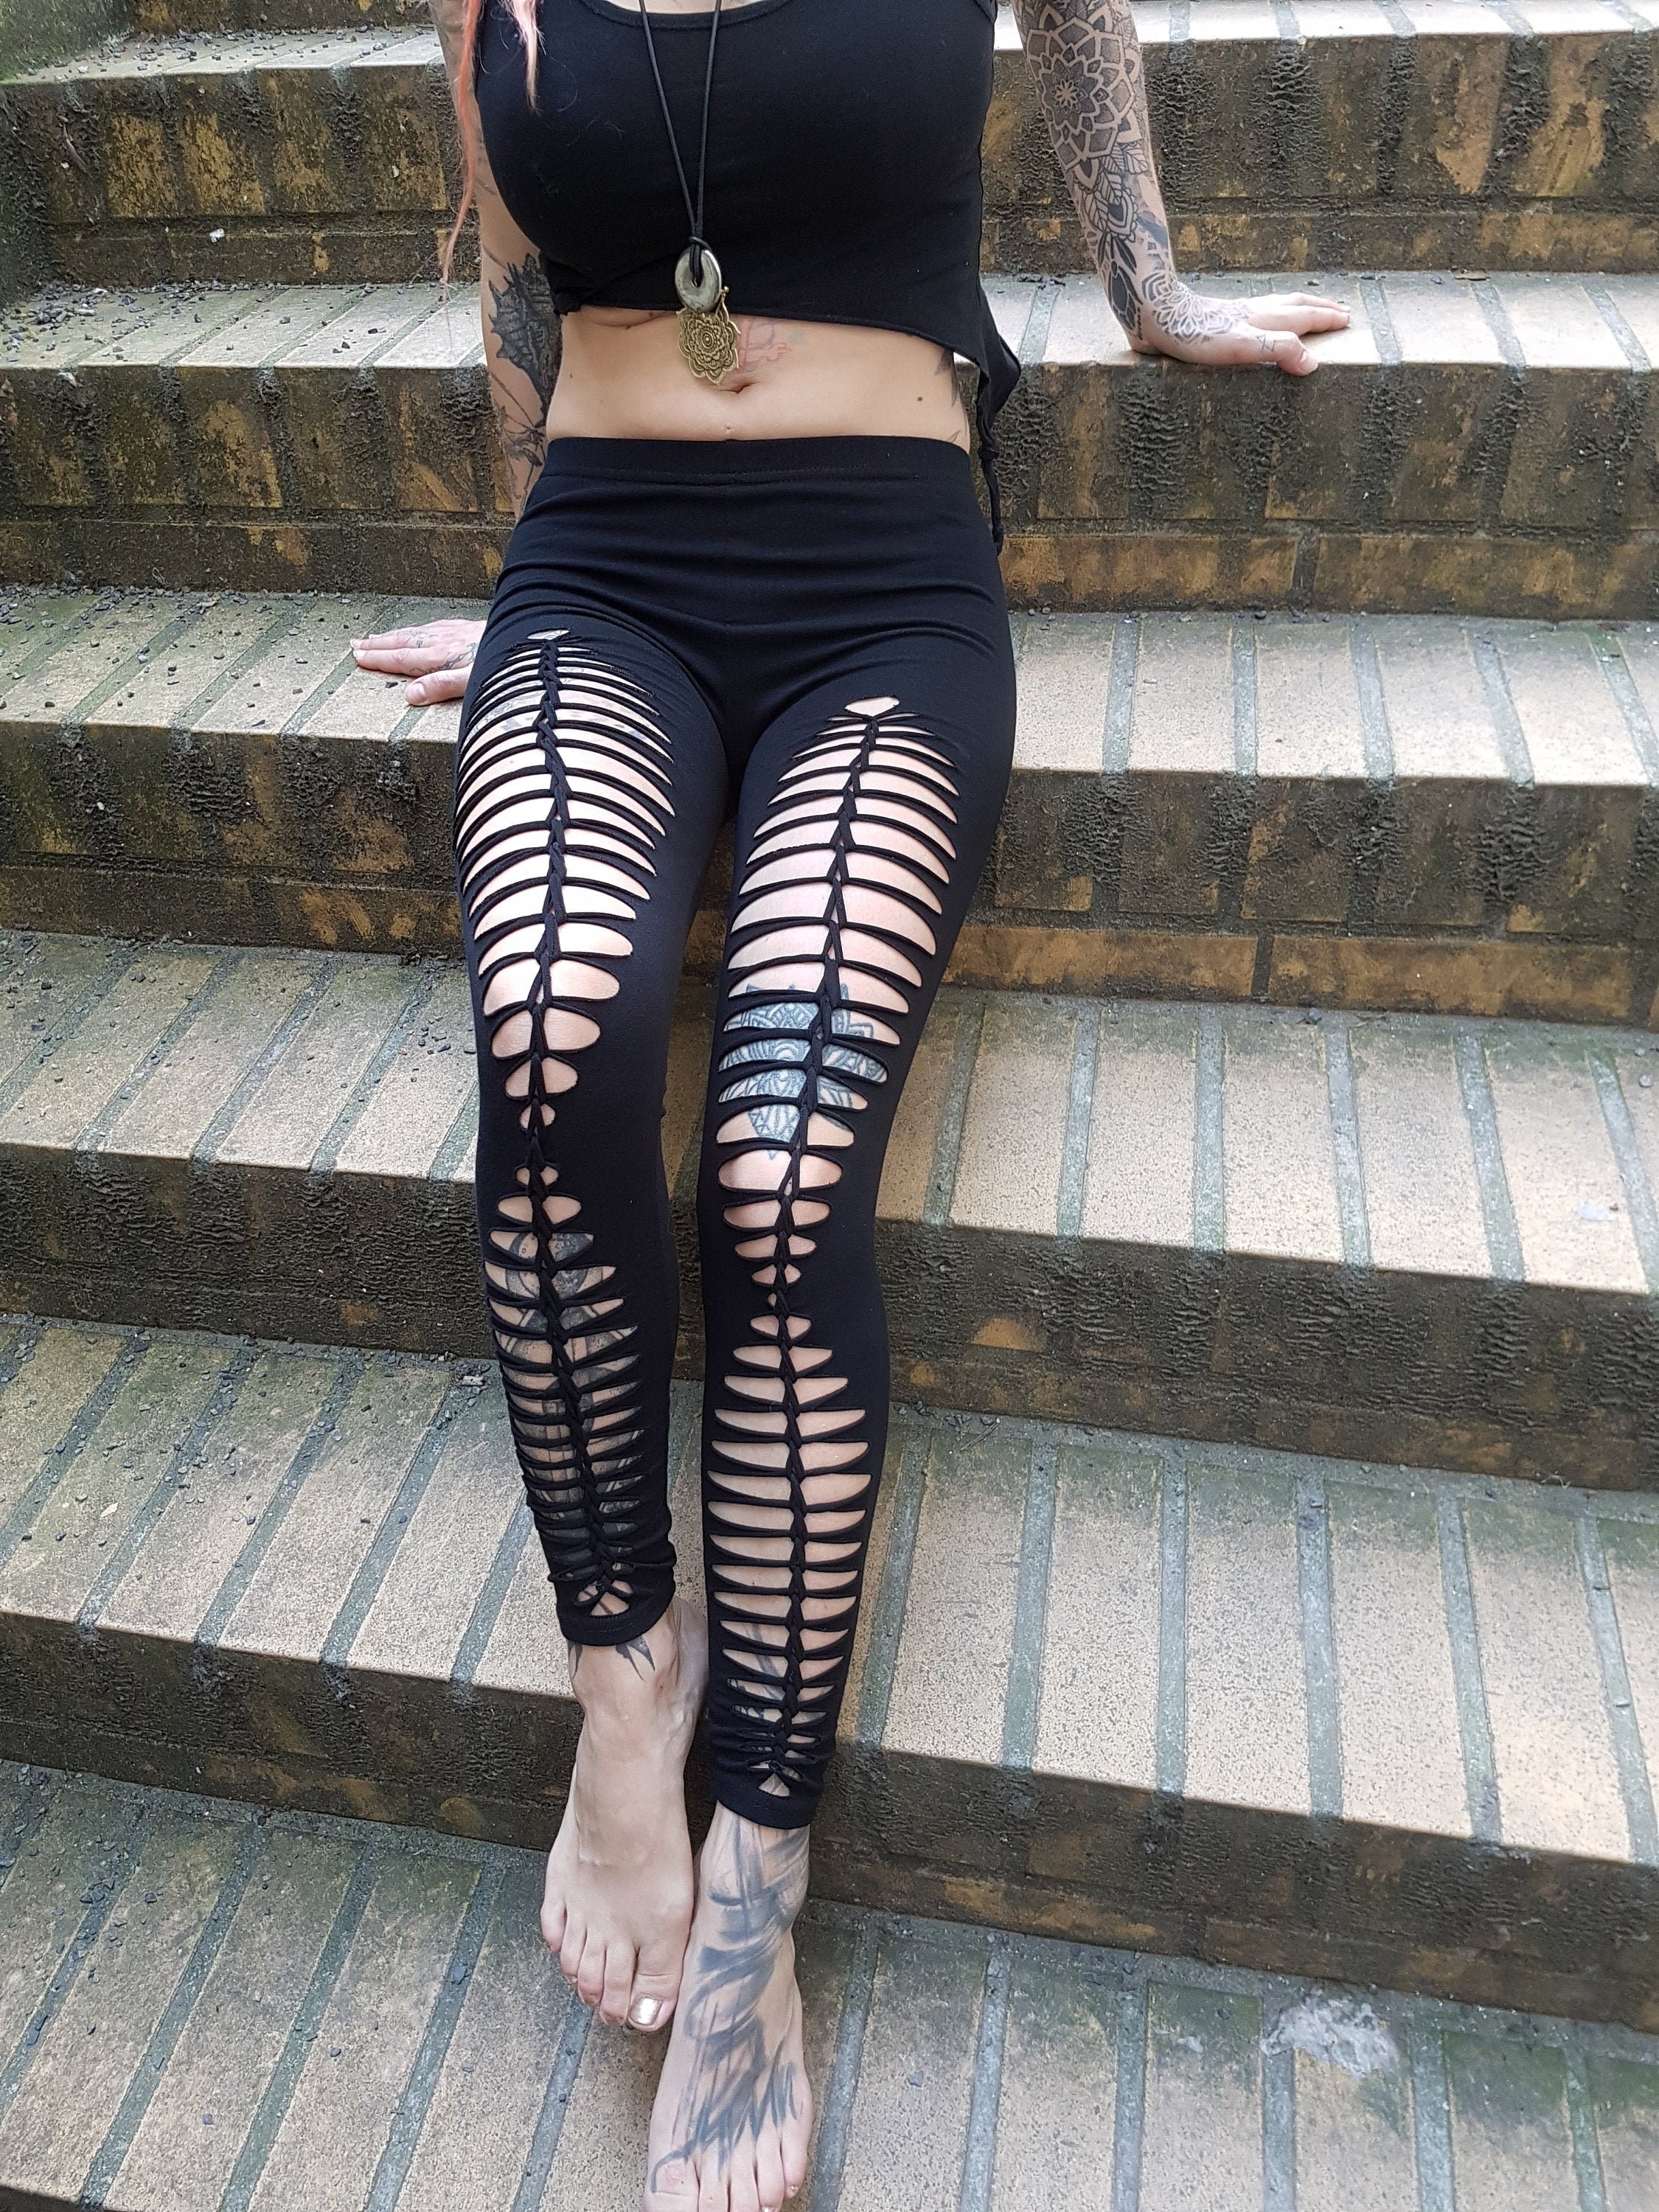 XXS-6XL Frontcut Leggings Black Cutouts Cut Out Goa Pixie Braided Psy  Burning Cosplay Yoga Lacing Geometric Pattern Rave Knotted -  Canada